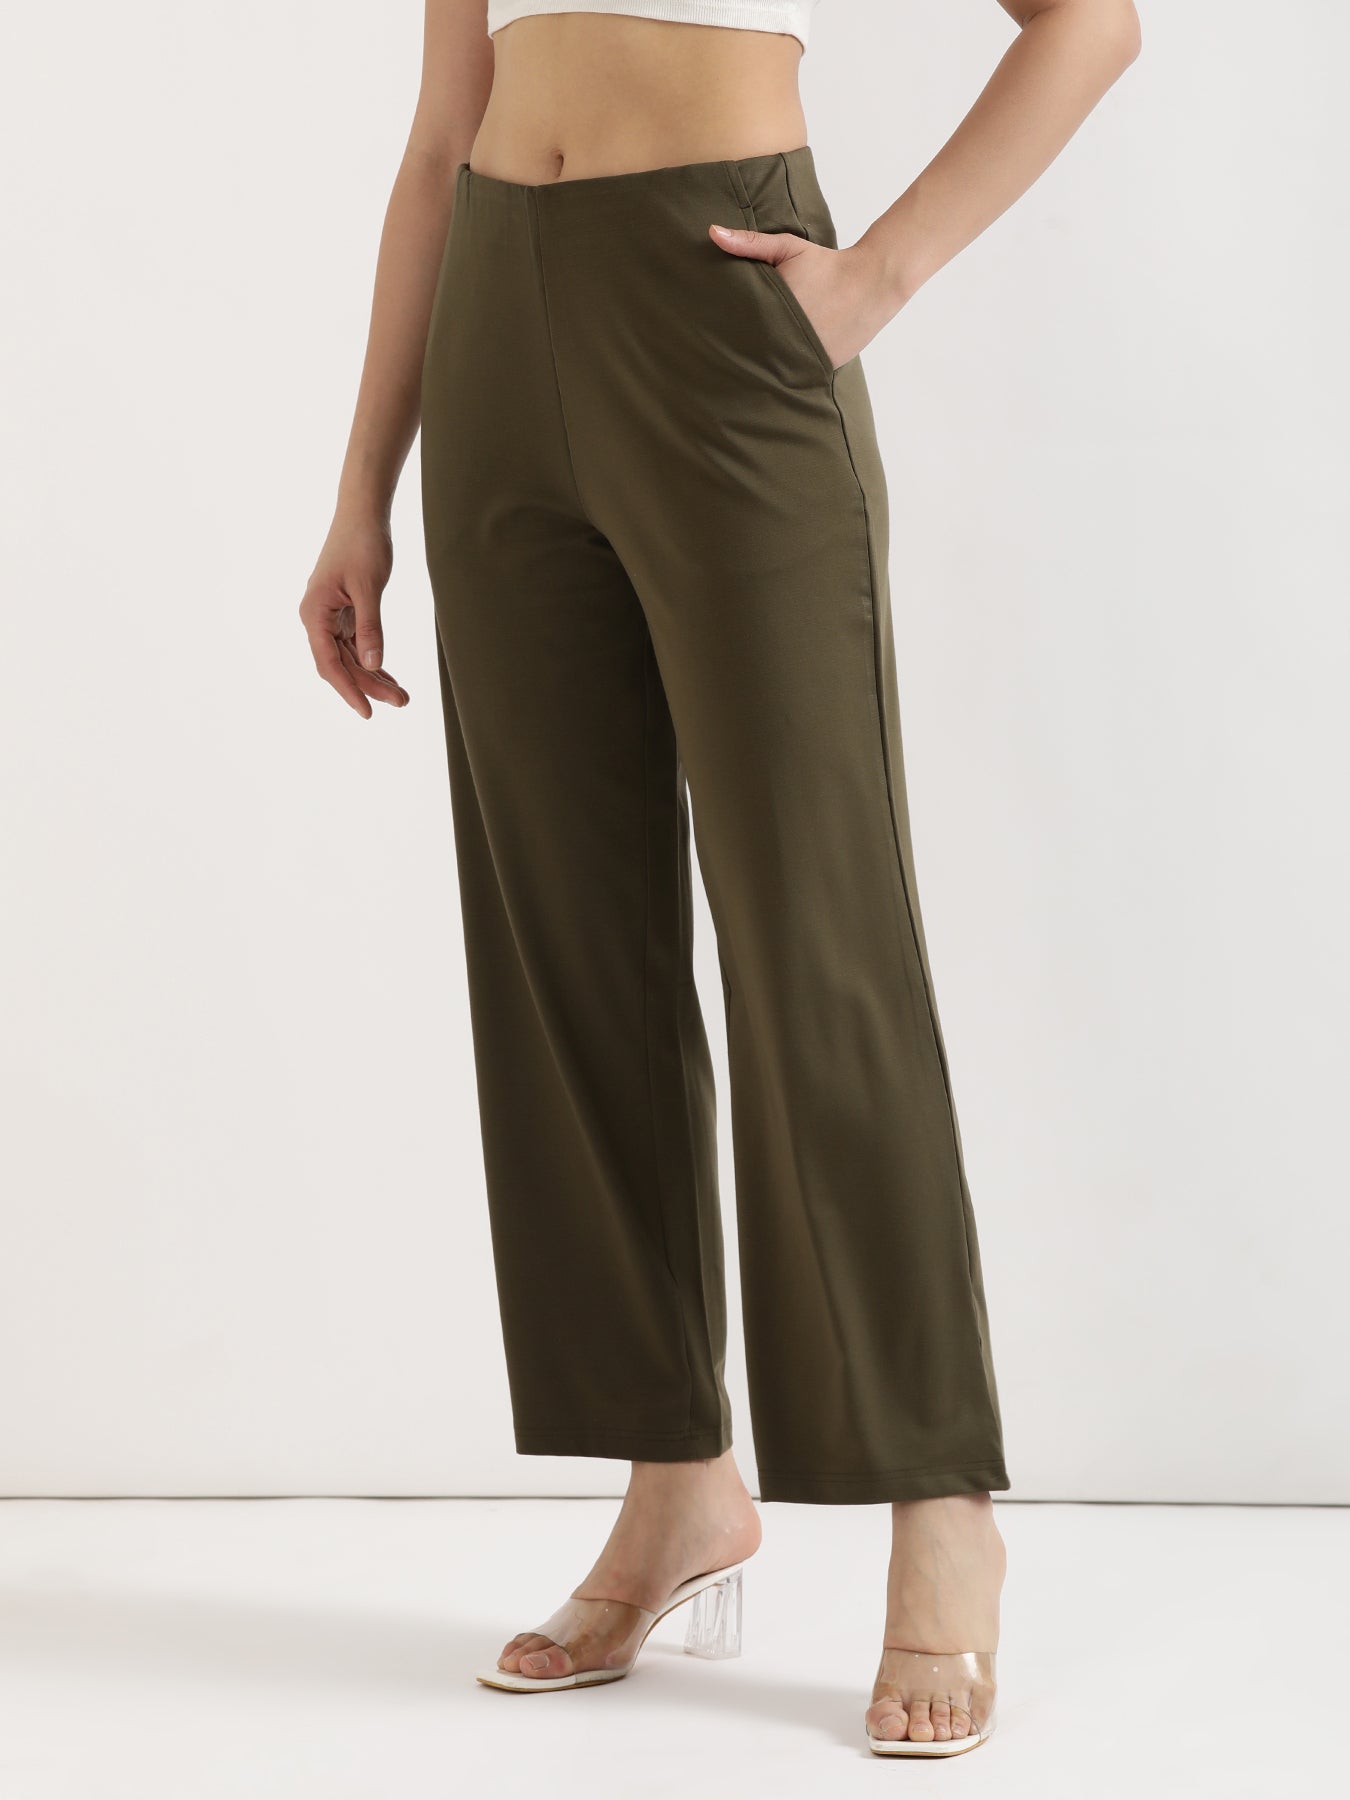 12 Shoes to Wear With Wide-Leg Pants